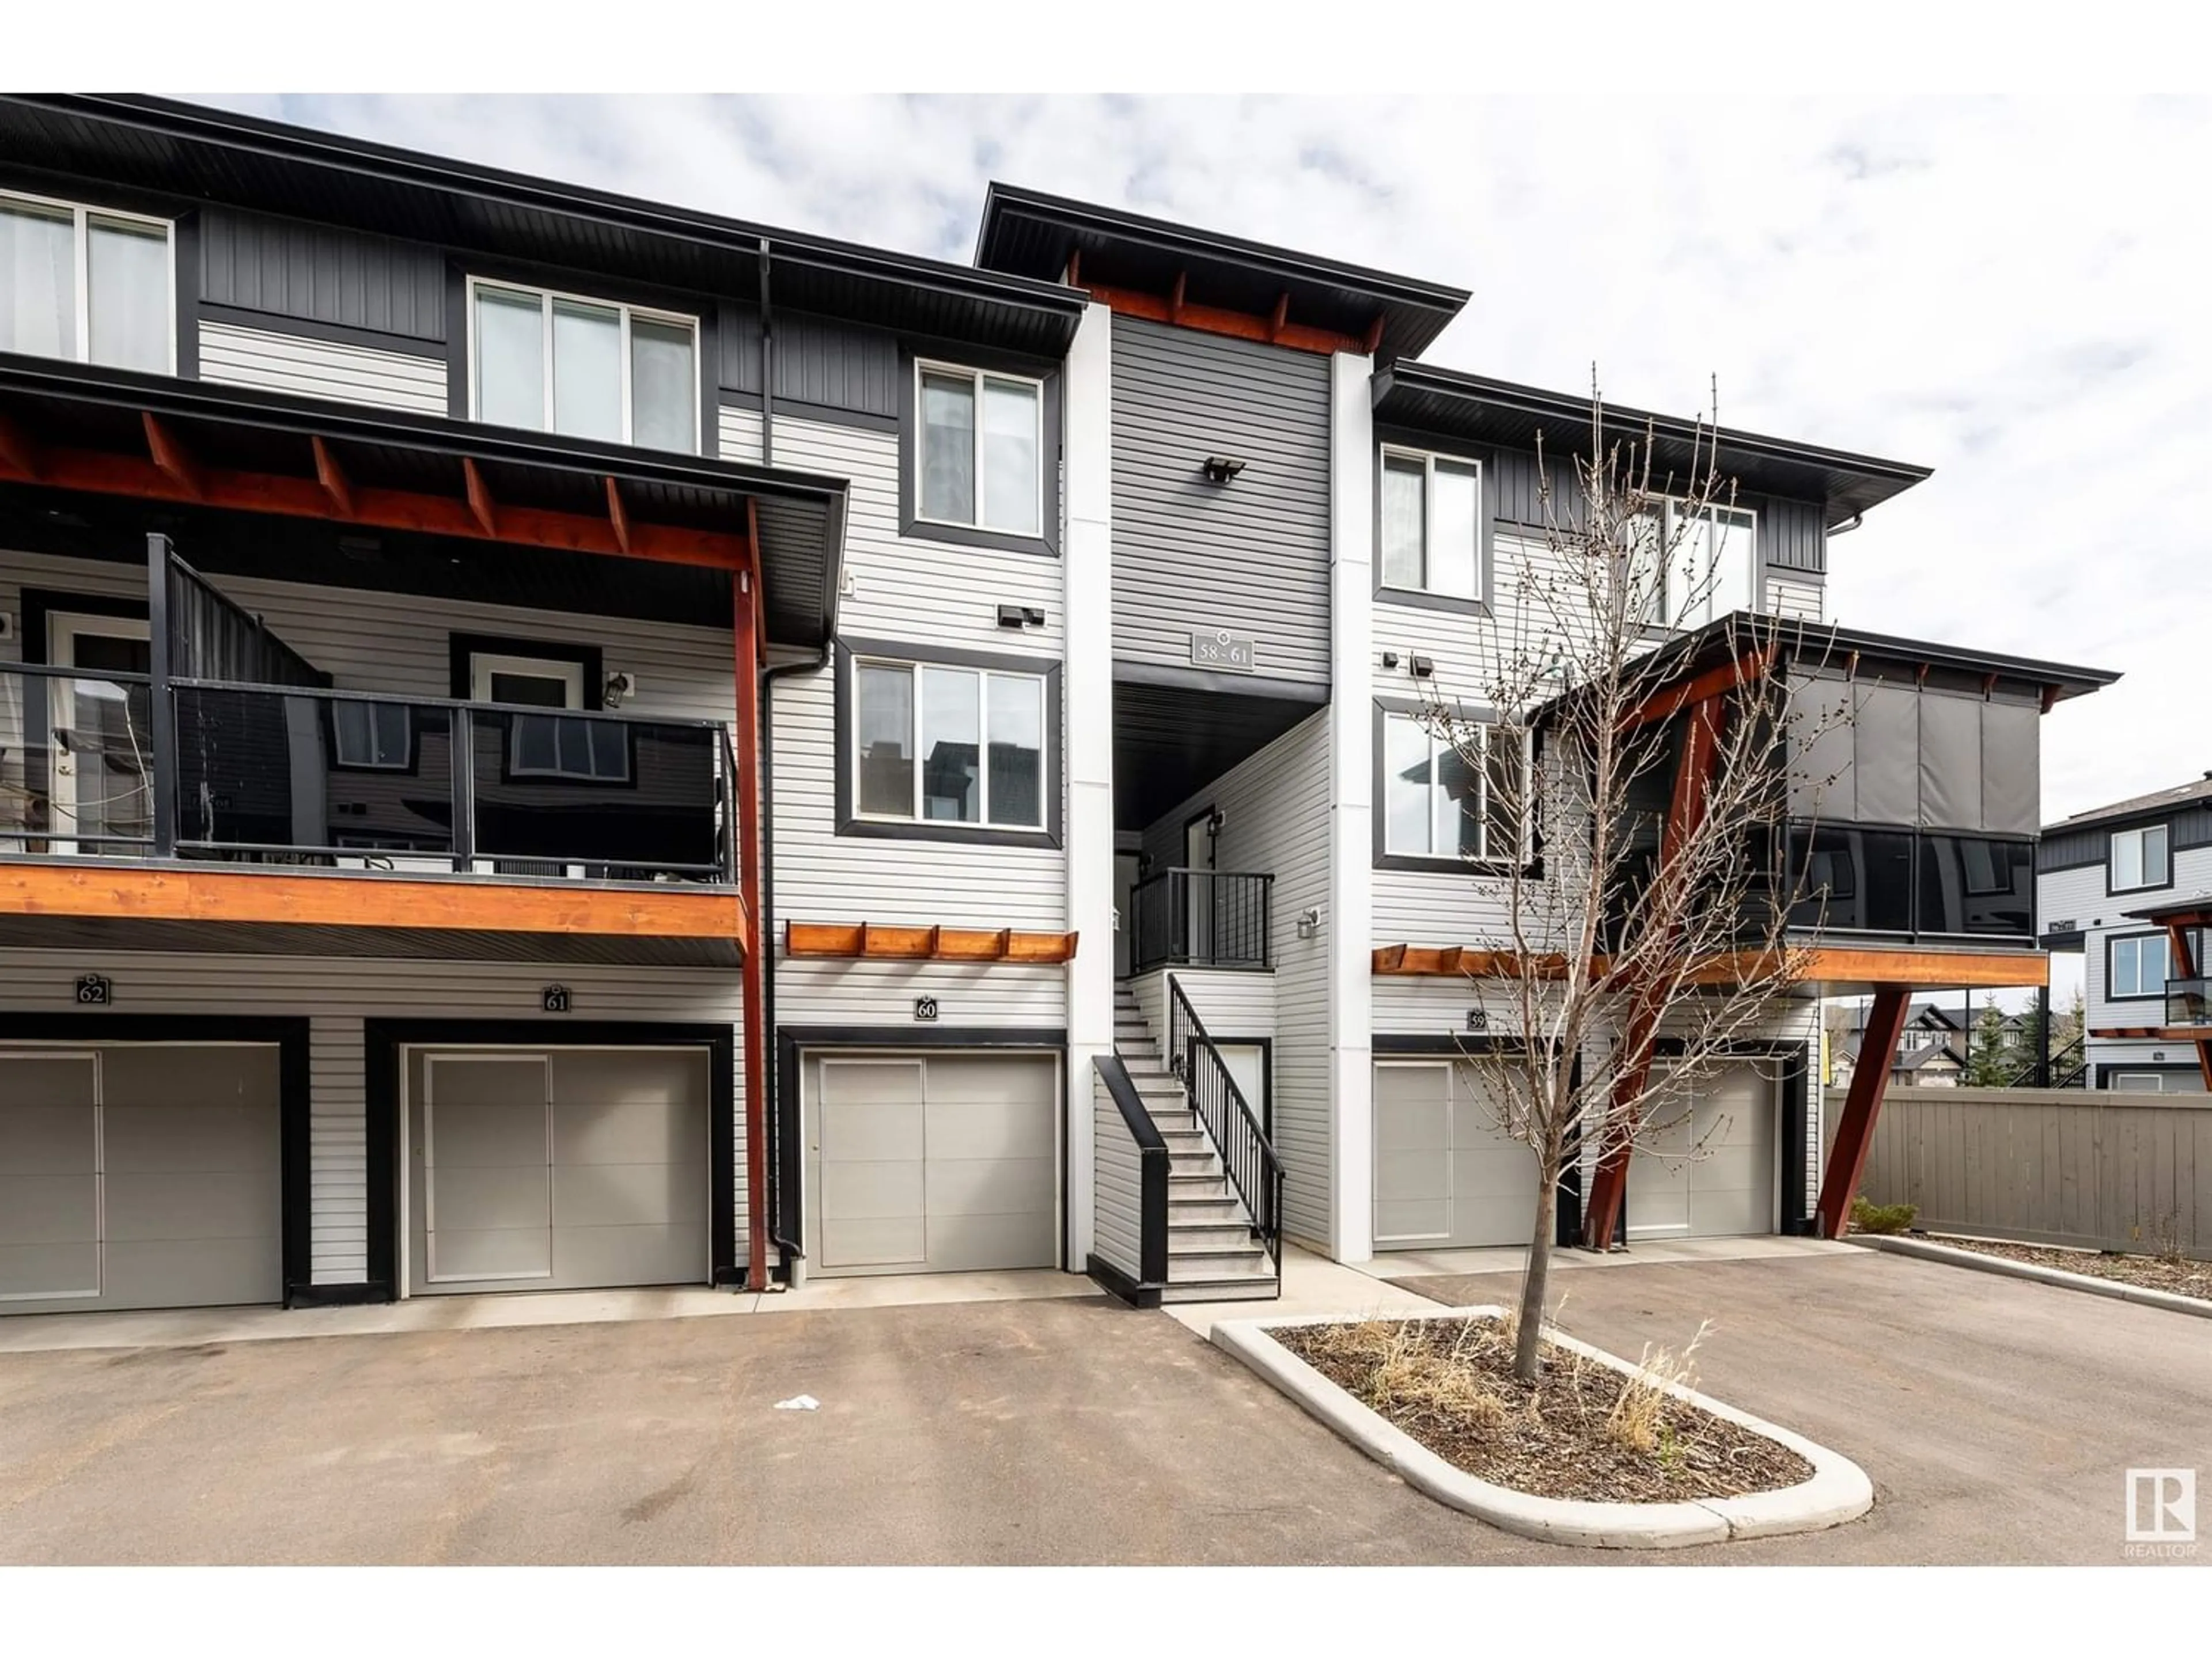 A pic from exterior of the house or condo for #60 446 ALLARD BV SW, Edmonton Alberta T6W3S7